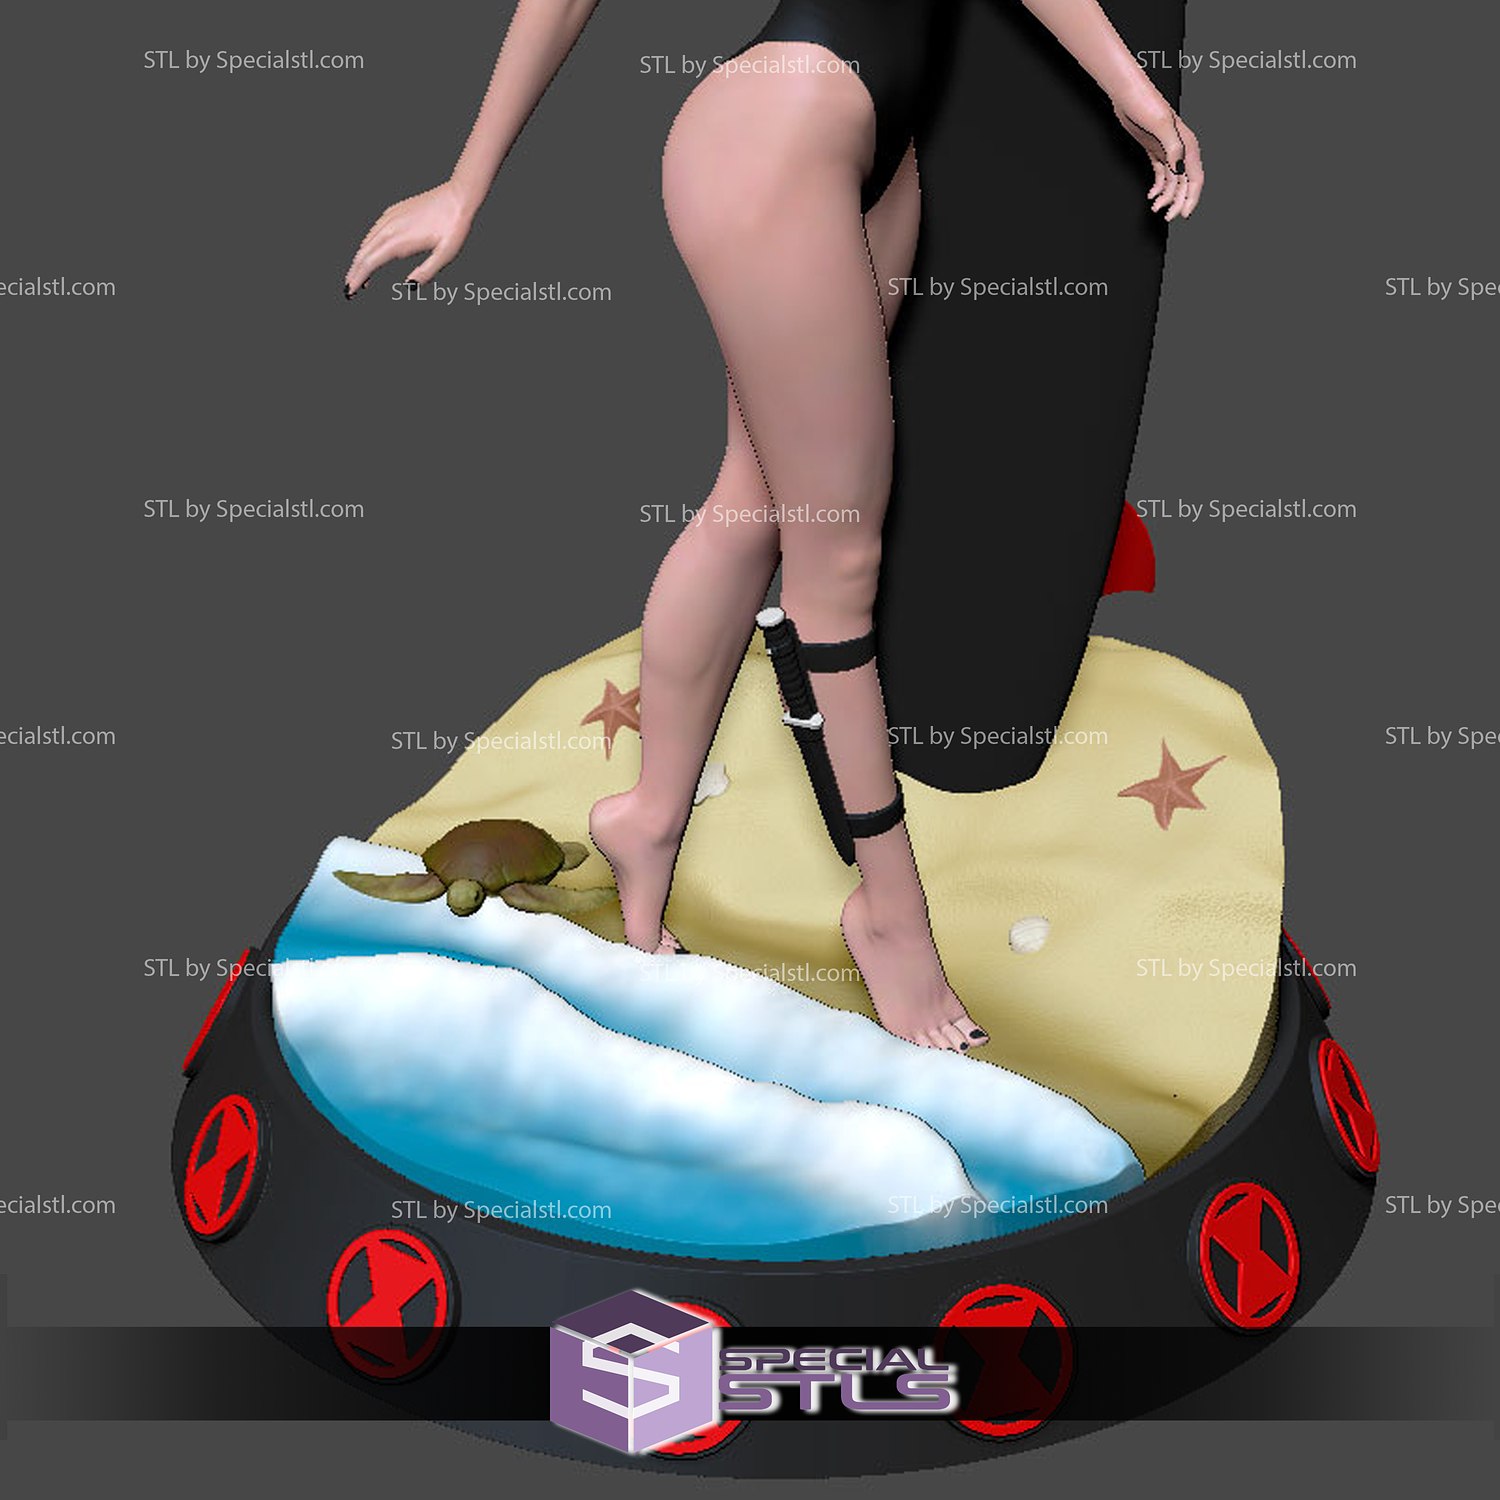 Black Widow Surfing Outfit from Marvel